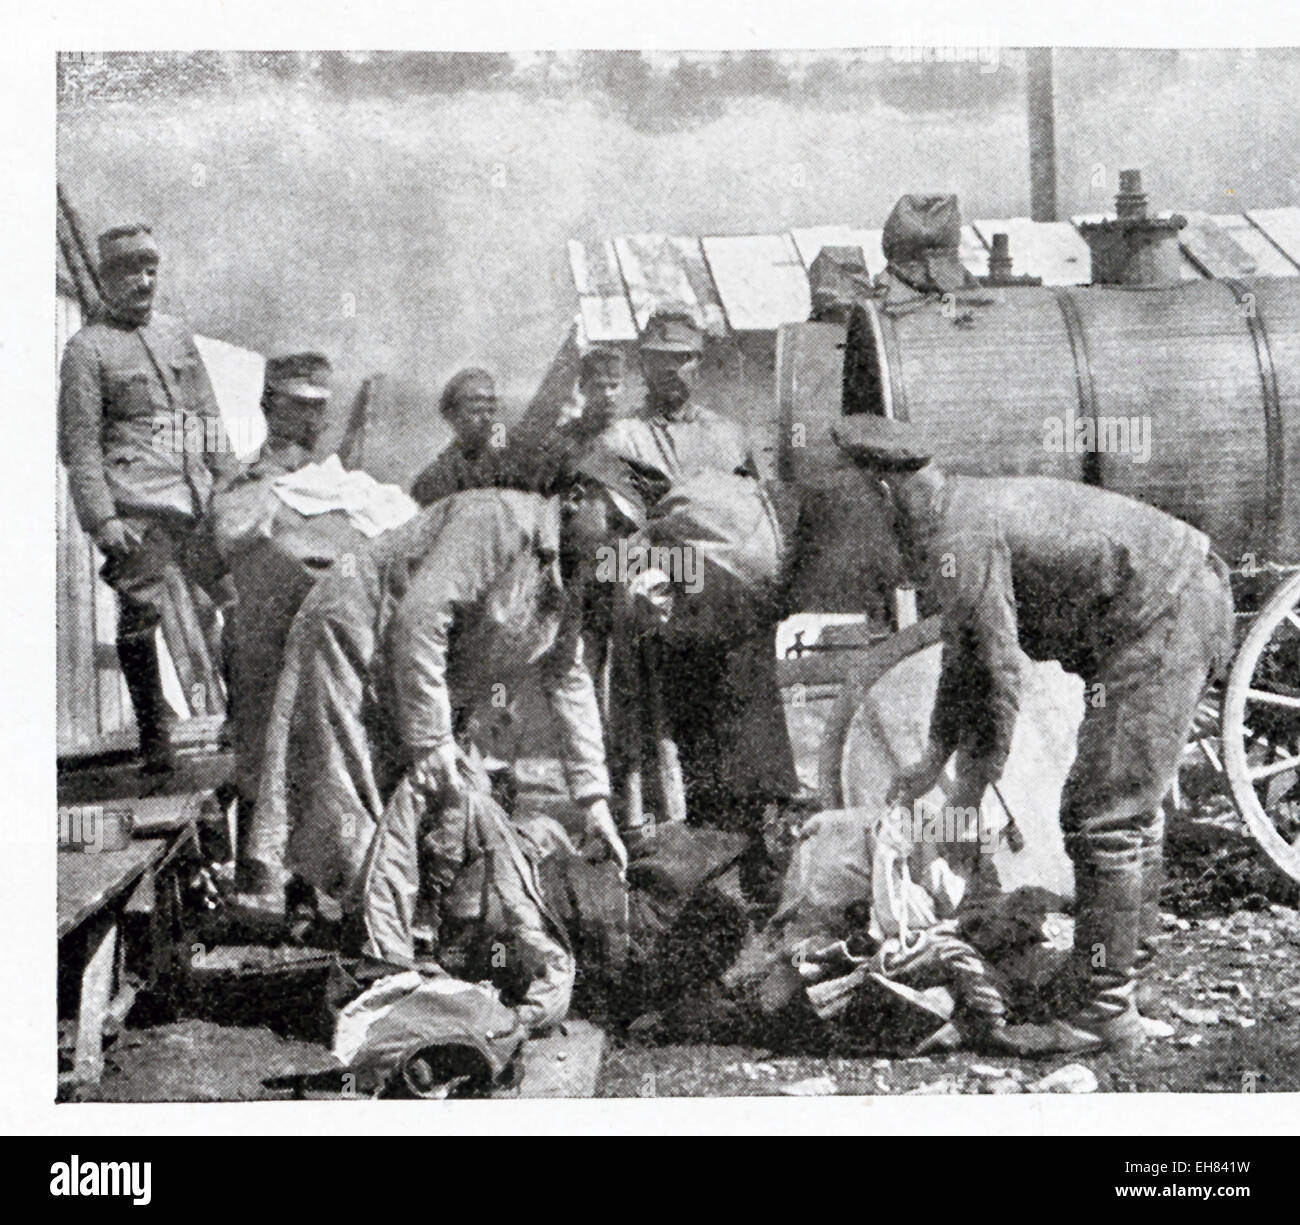 This photo shows portable disinfecting apparatus used by the Austrians in camps, especially prisoner of war camps, to disinfect the clothes and prisoners. Here there are disinfecting clothes. There were typhus epidemic outbreaks and new measures were introduce to reduce as mush as possible further outbreaks. Stock Photo